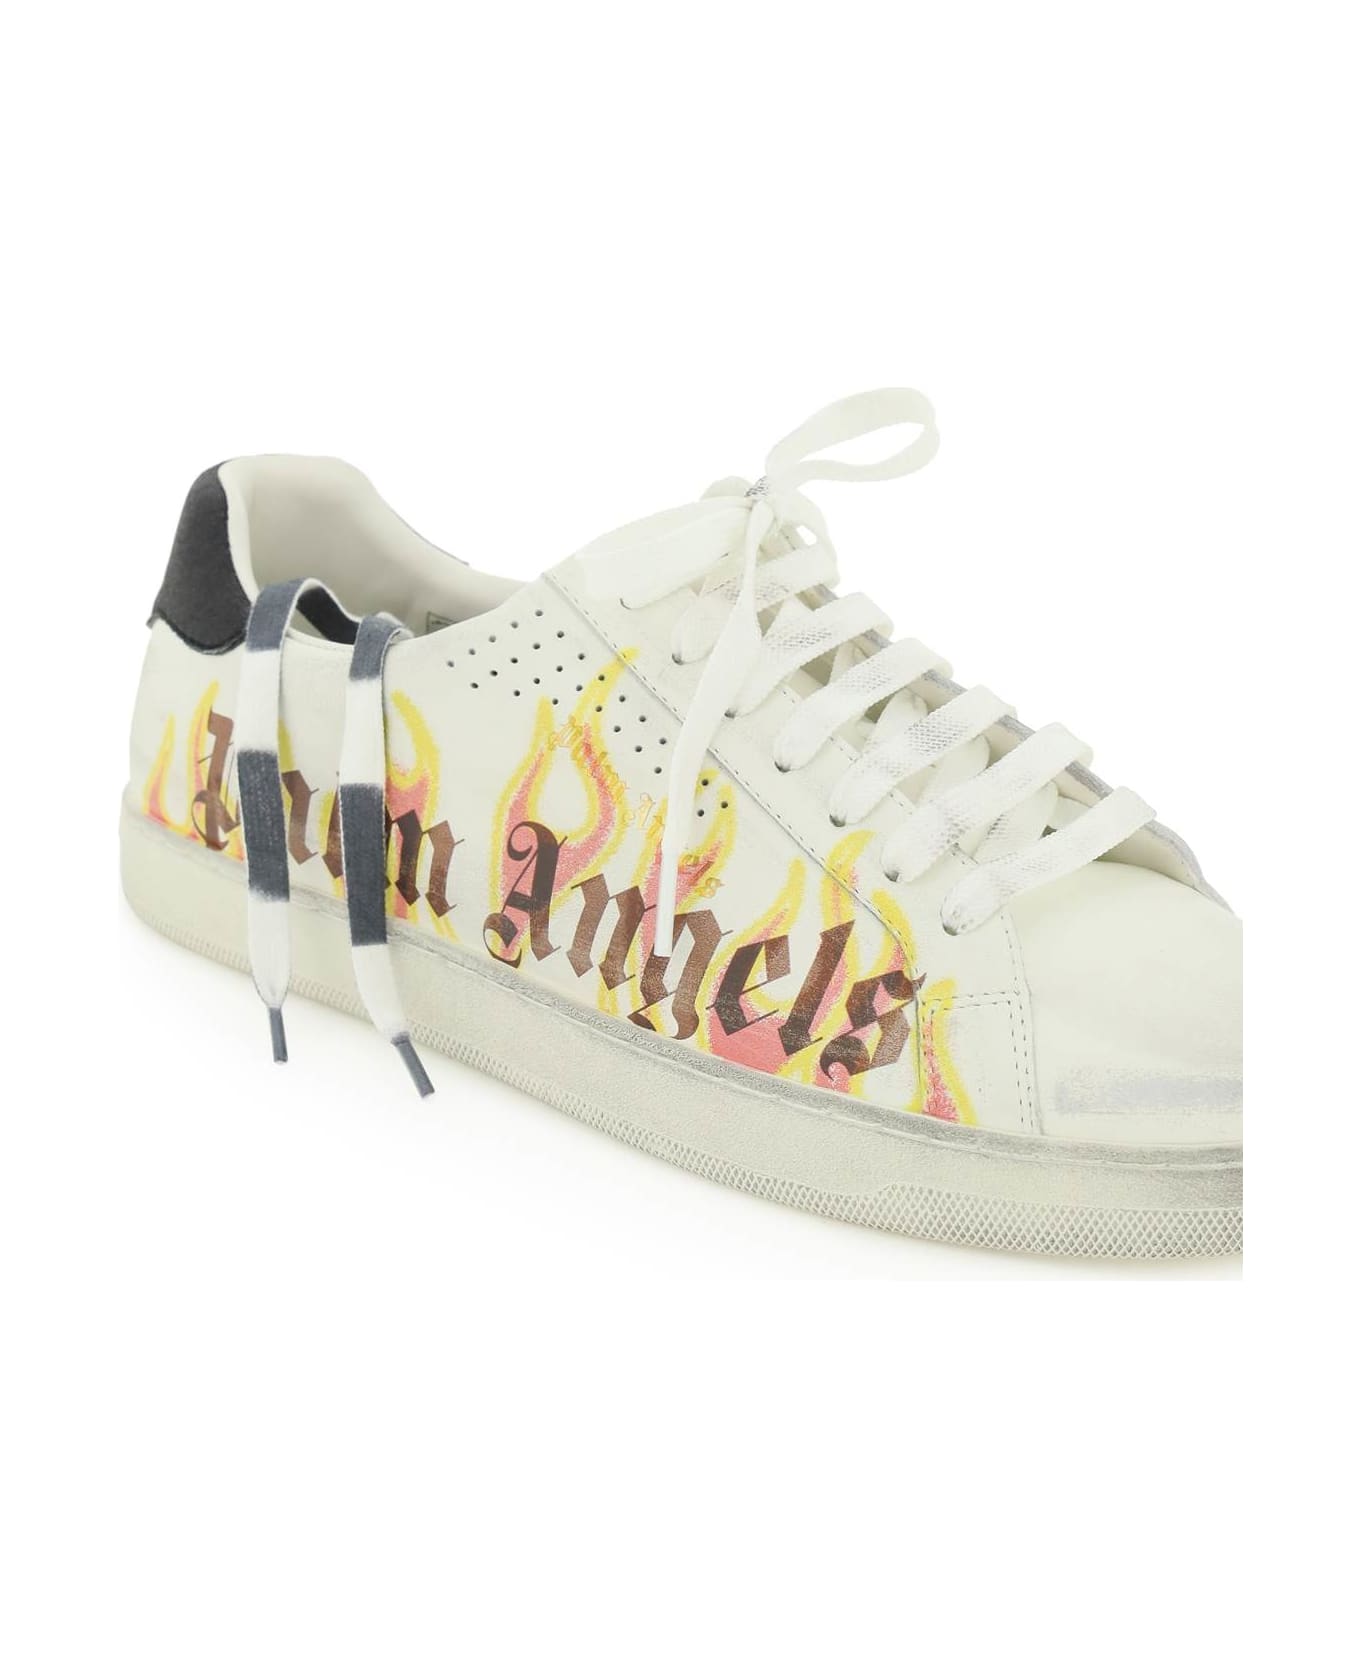 Palm Angels Palm One Sneakers - WHITE YELLOW (White) スニーカー